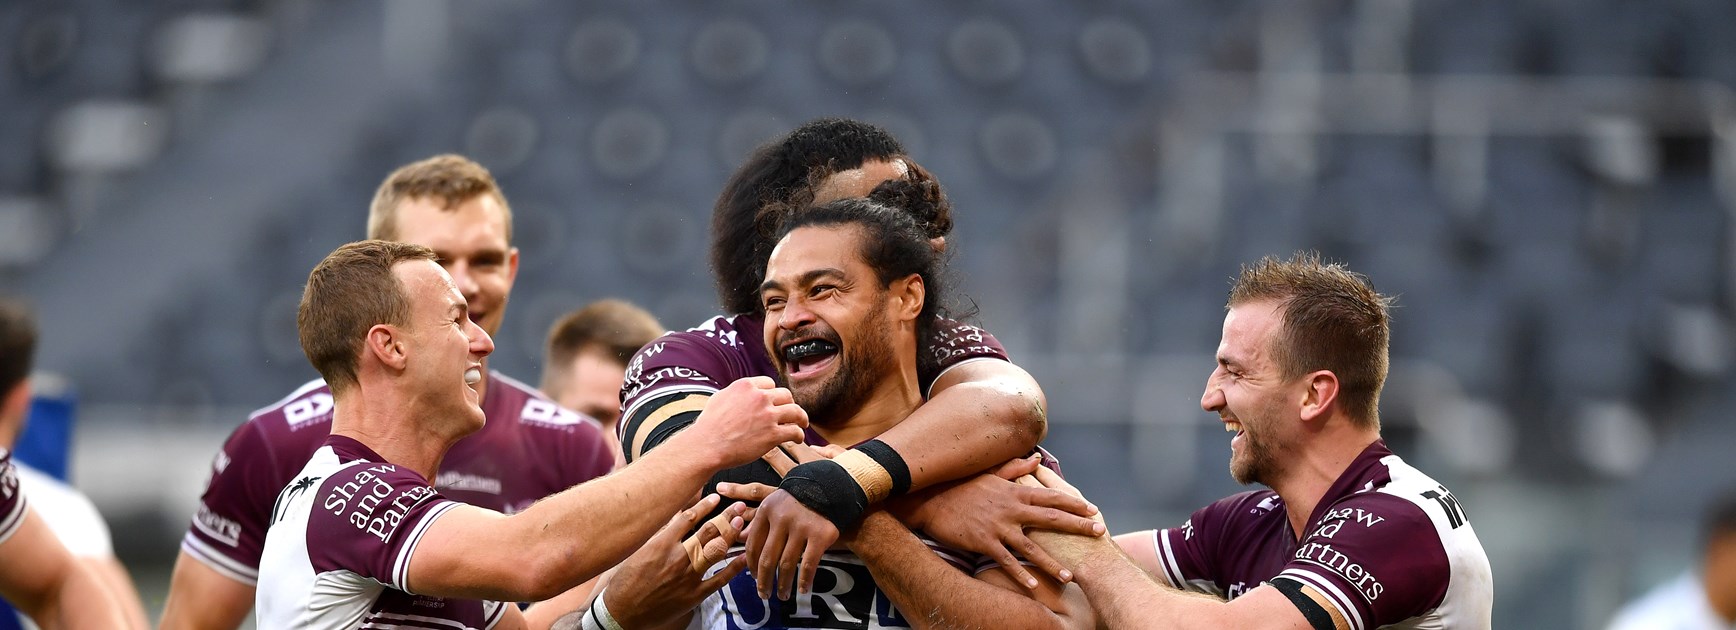 Sea Eagles schedules for Rounds 20-21